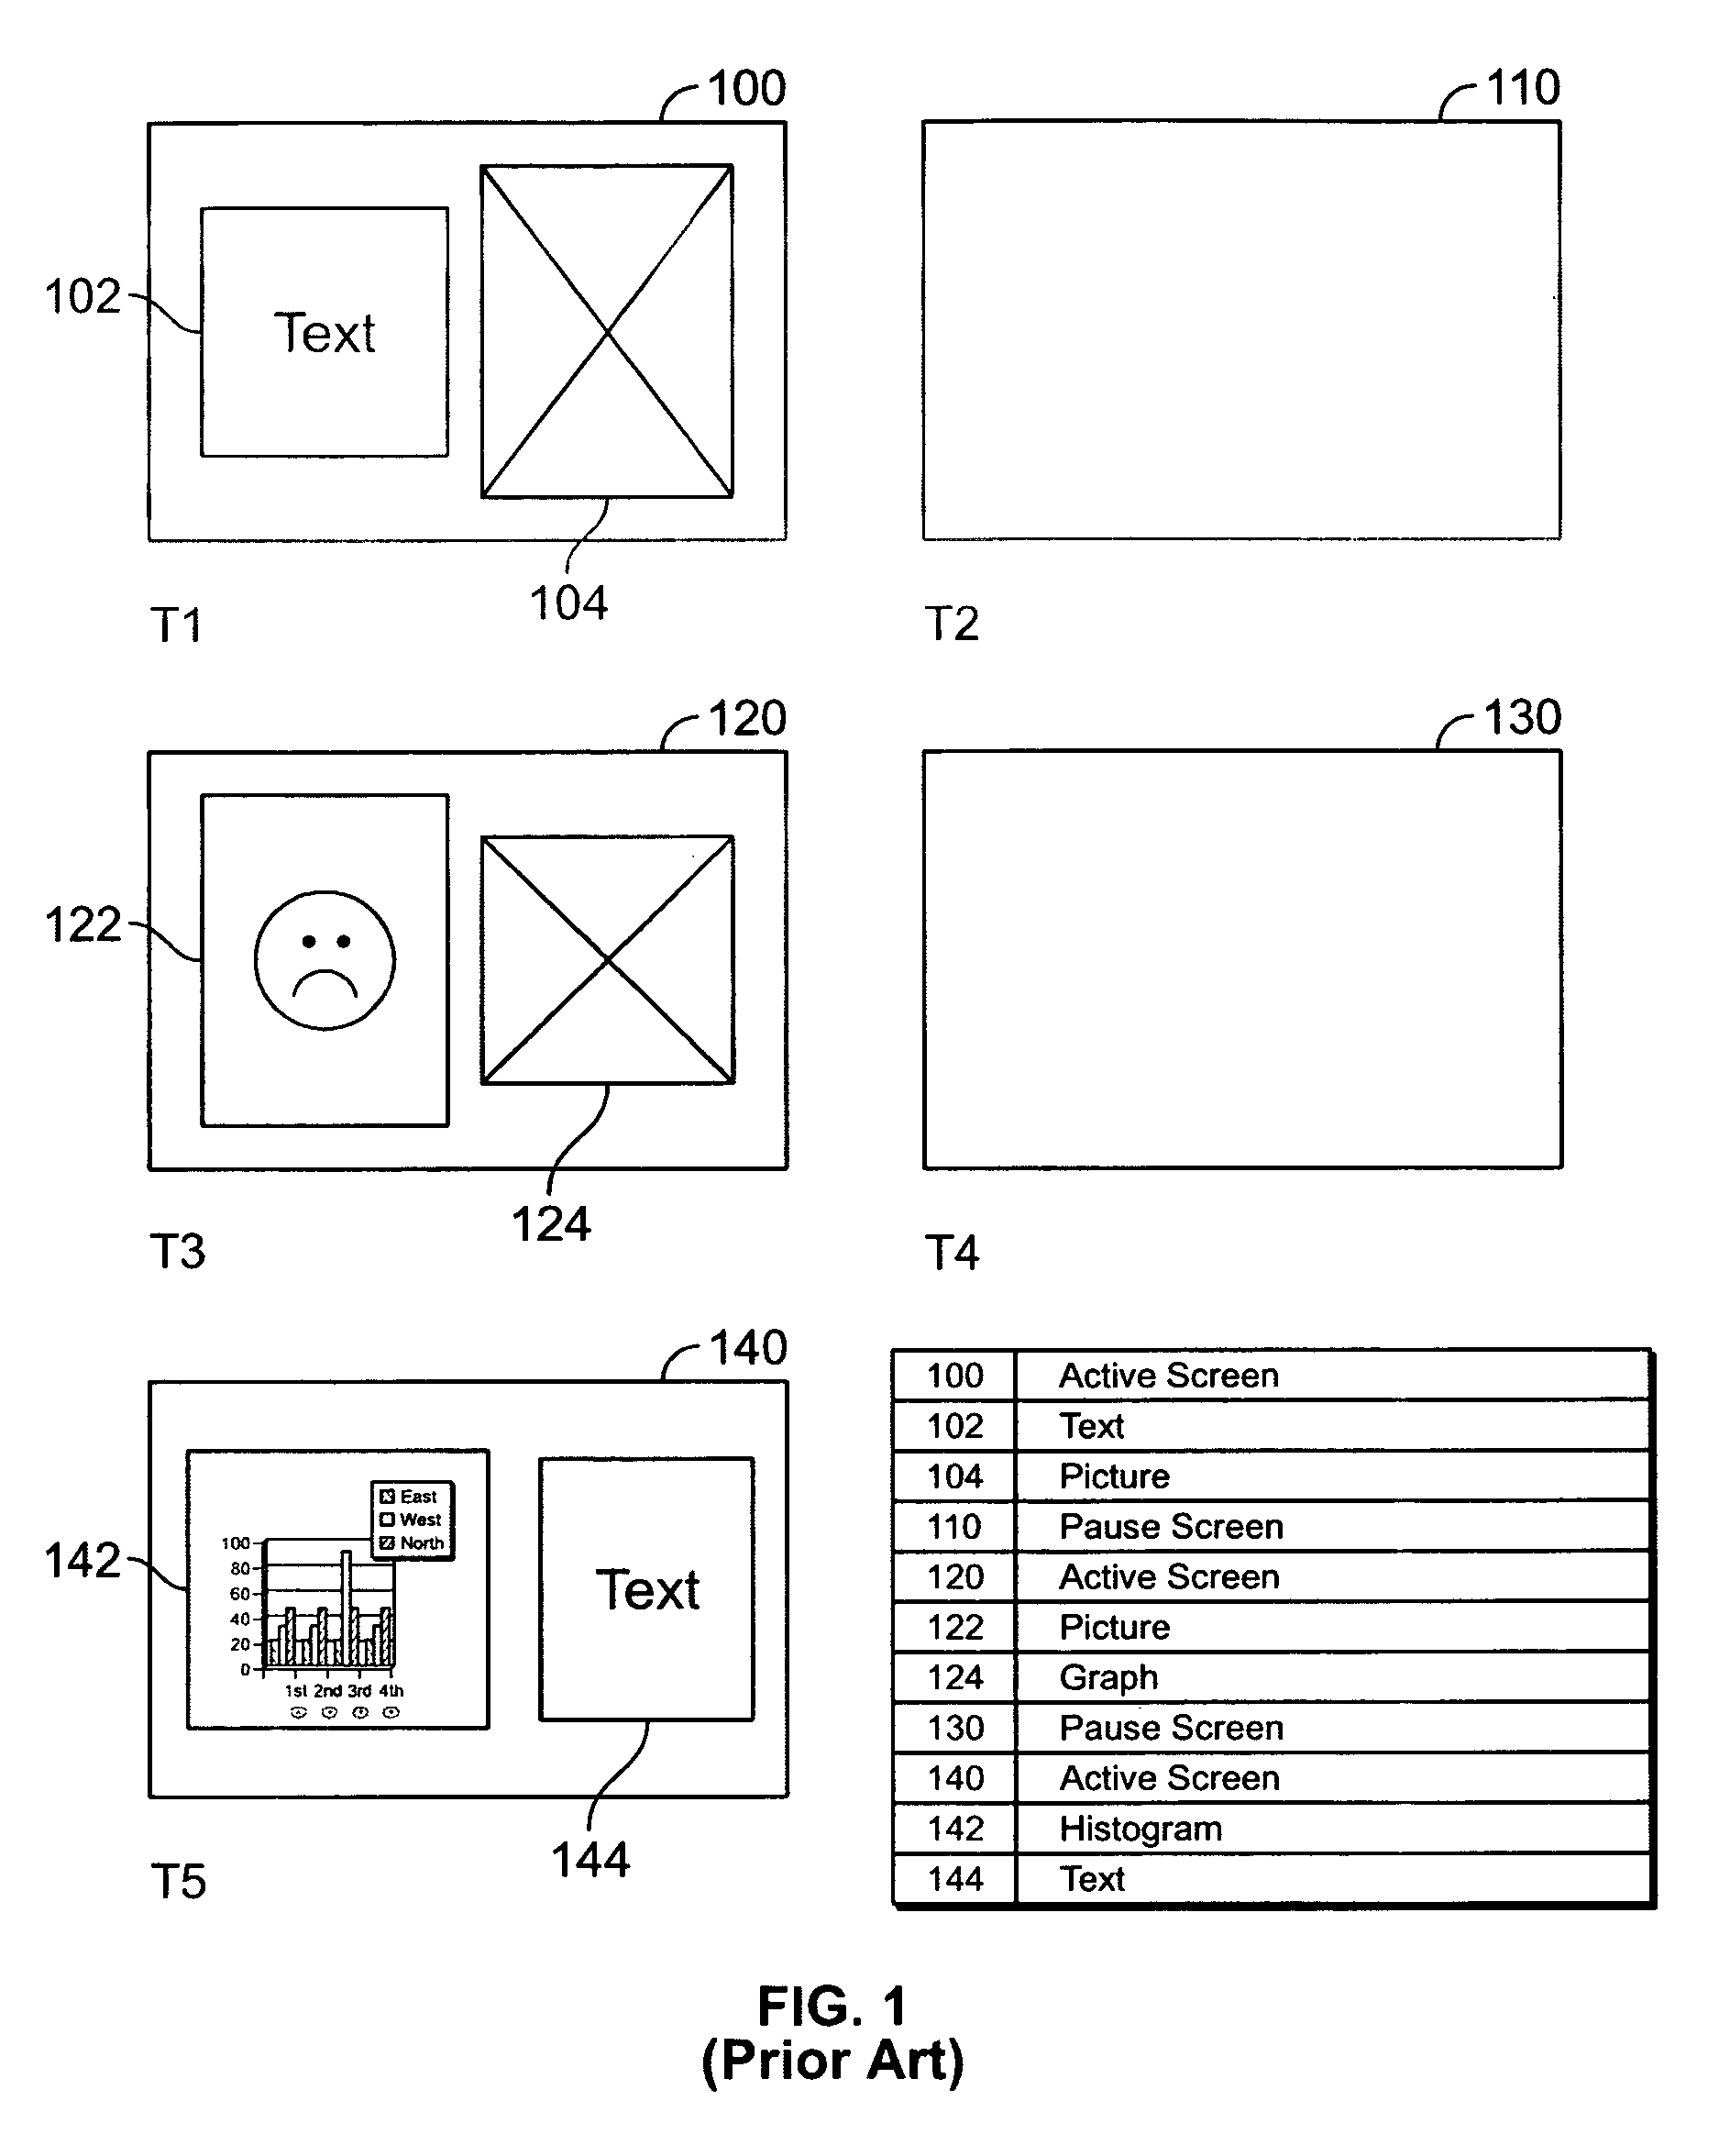 System, method and apparatus for converting and integrating media files